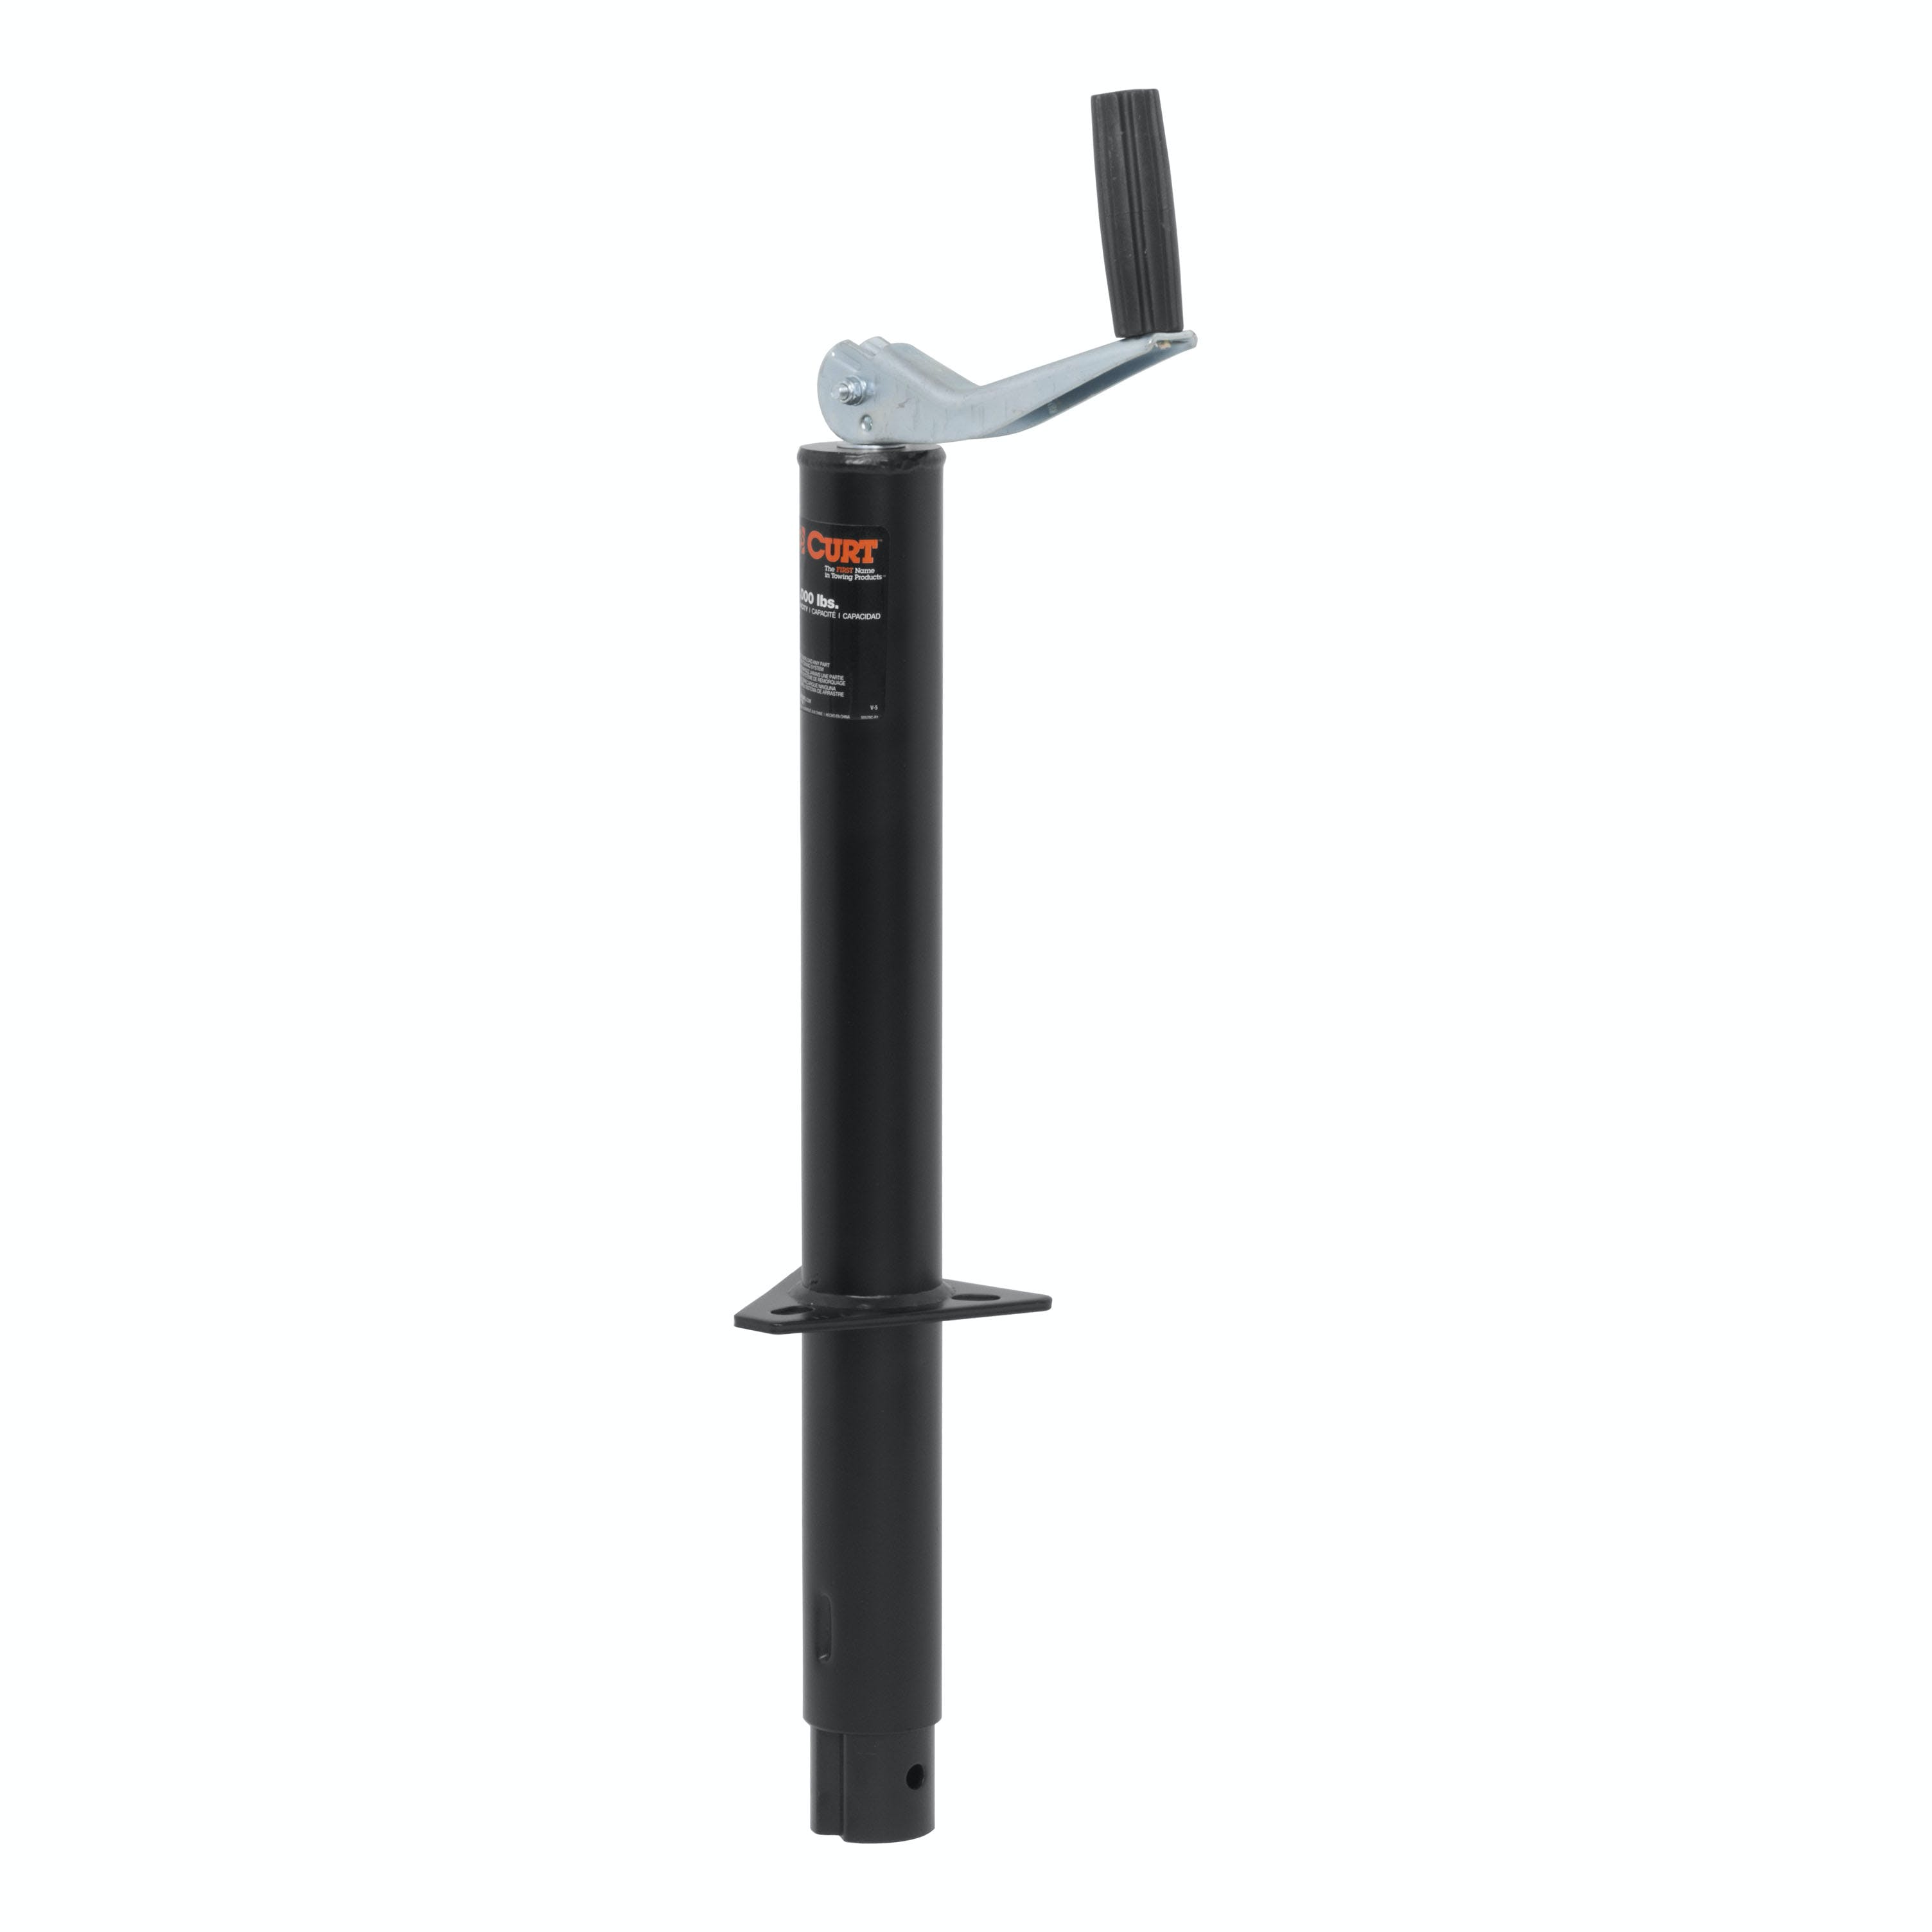 CURT 28203 A-Frame Jack with Top Handle (2,000 lbs, 15 Travel, Packaged)